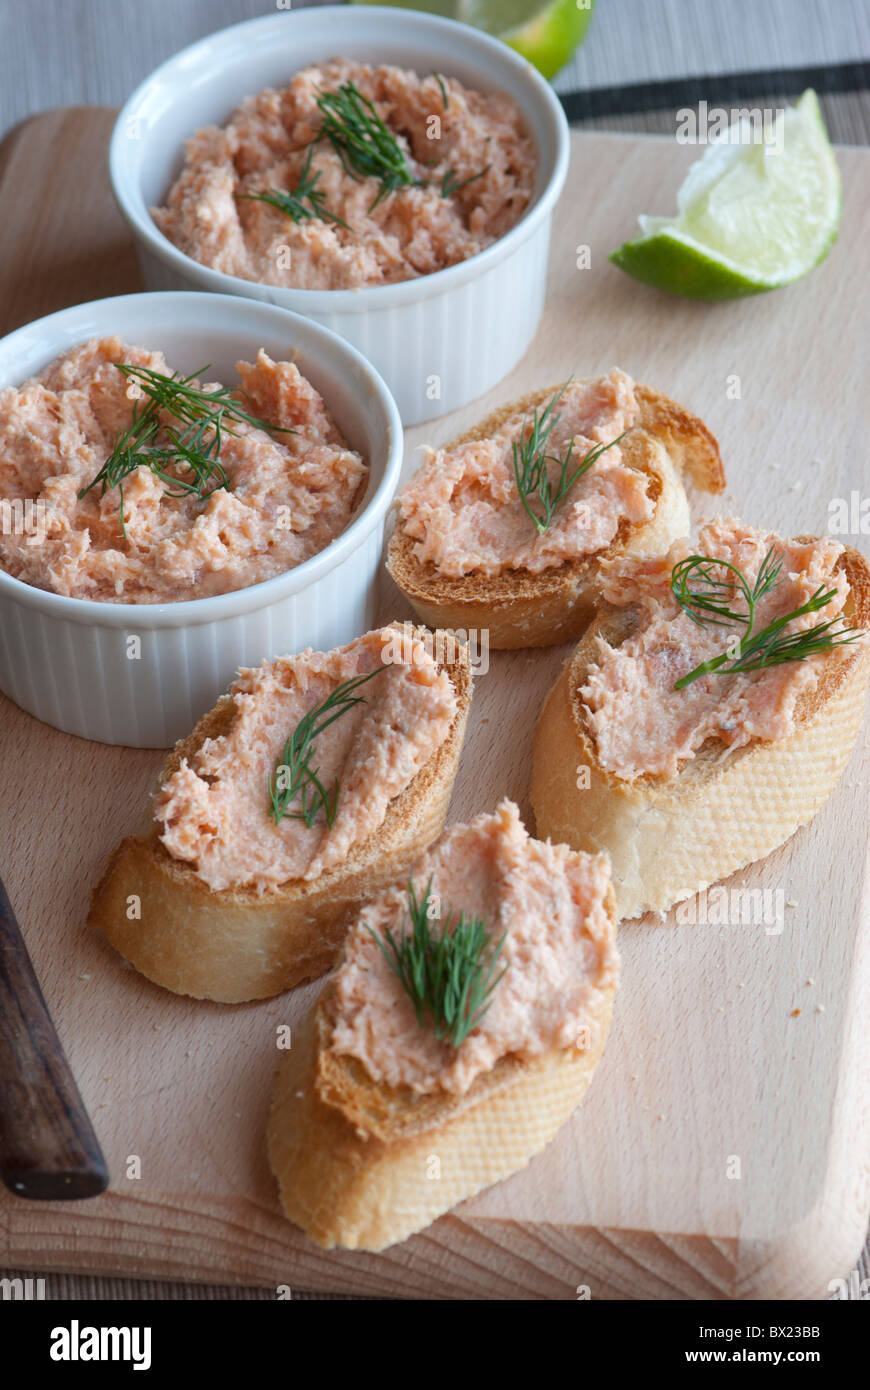 Smoked salmon pate with dill on toasted baguette Stock Photo